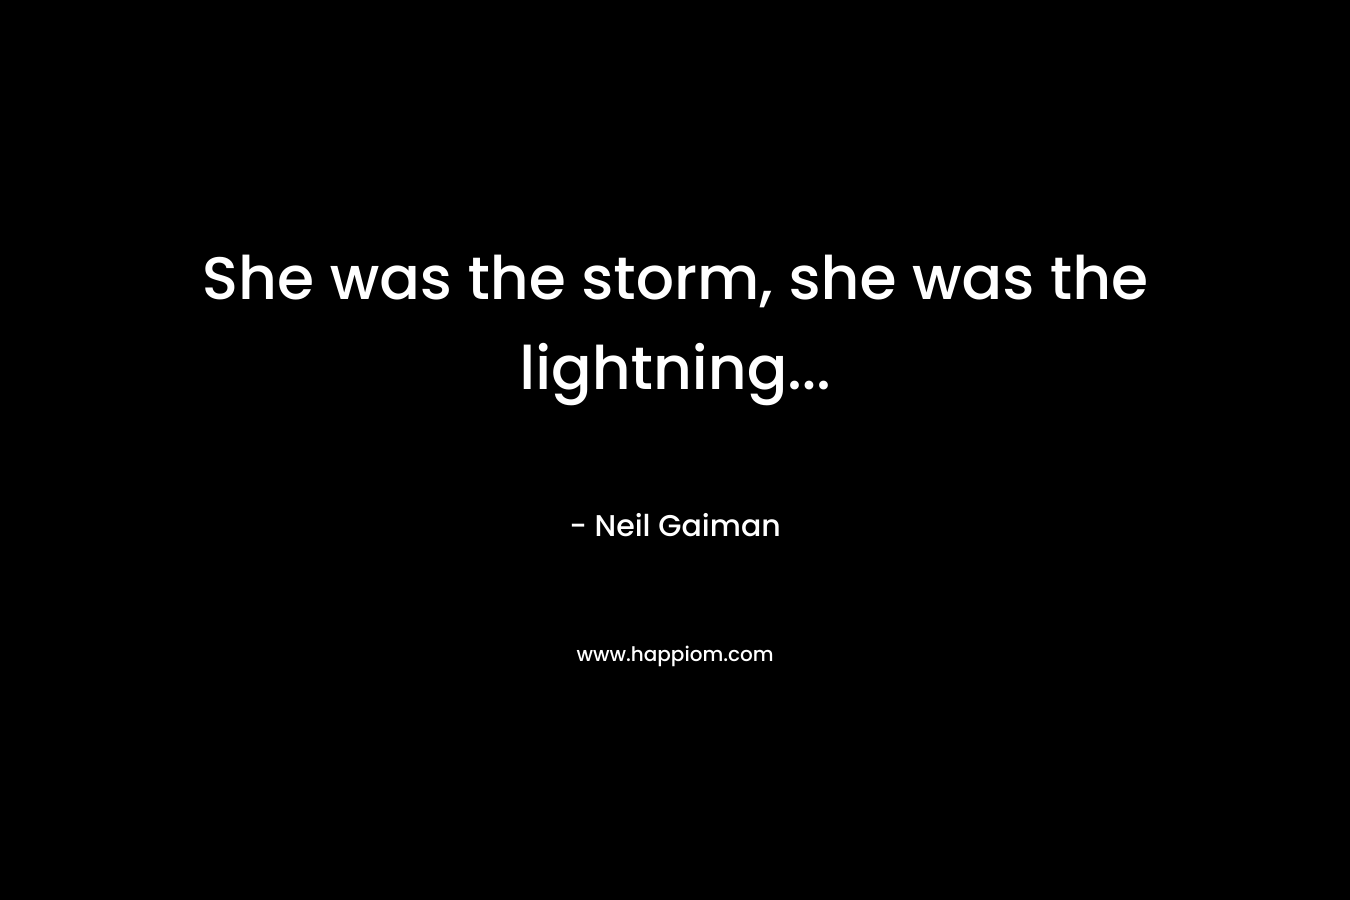 She was the storm, she was the lightning...